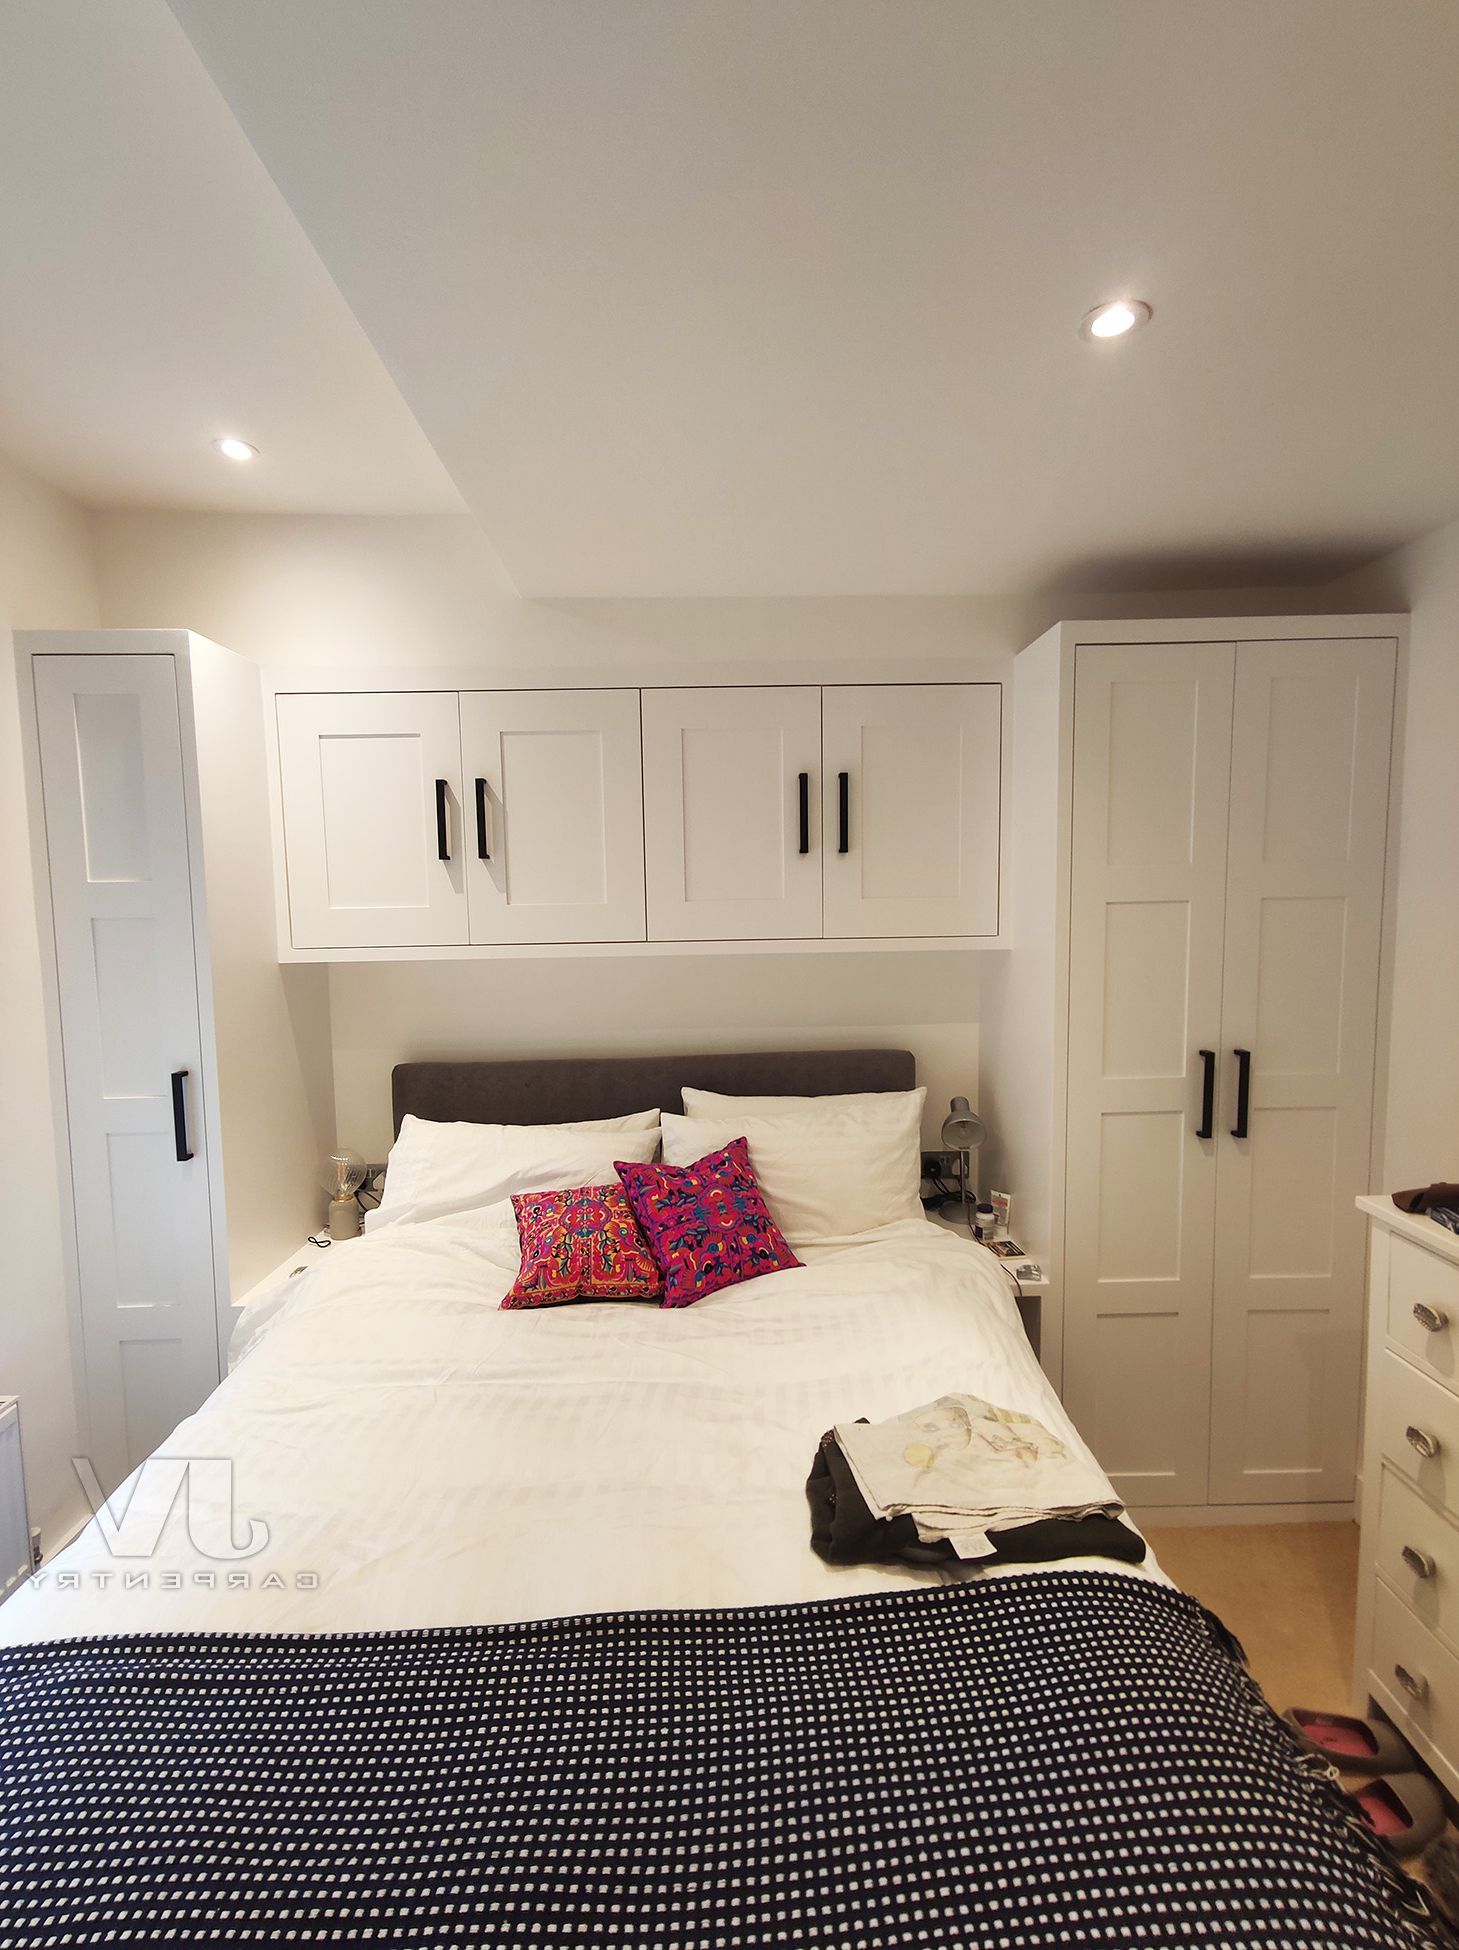 12 Fitted Wardrobes Over Bed Ideas For Your Bedroom | Jv Carpentry Regarding Over Bed Wardrobes Units (Gallery 14 of 20)